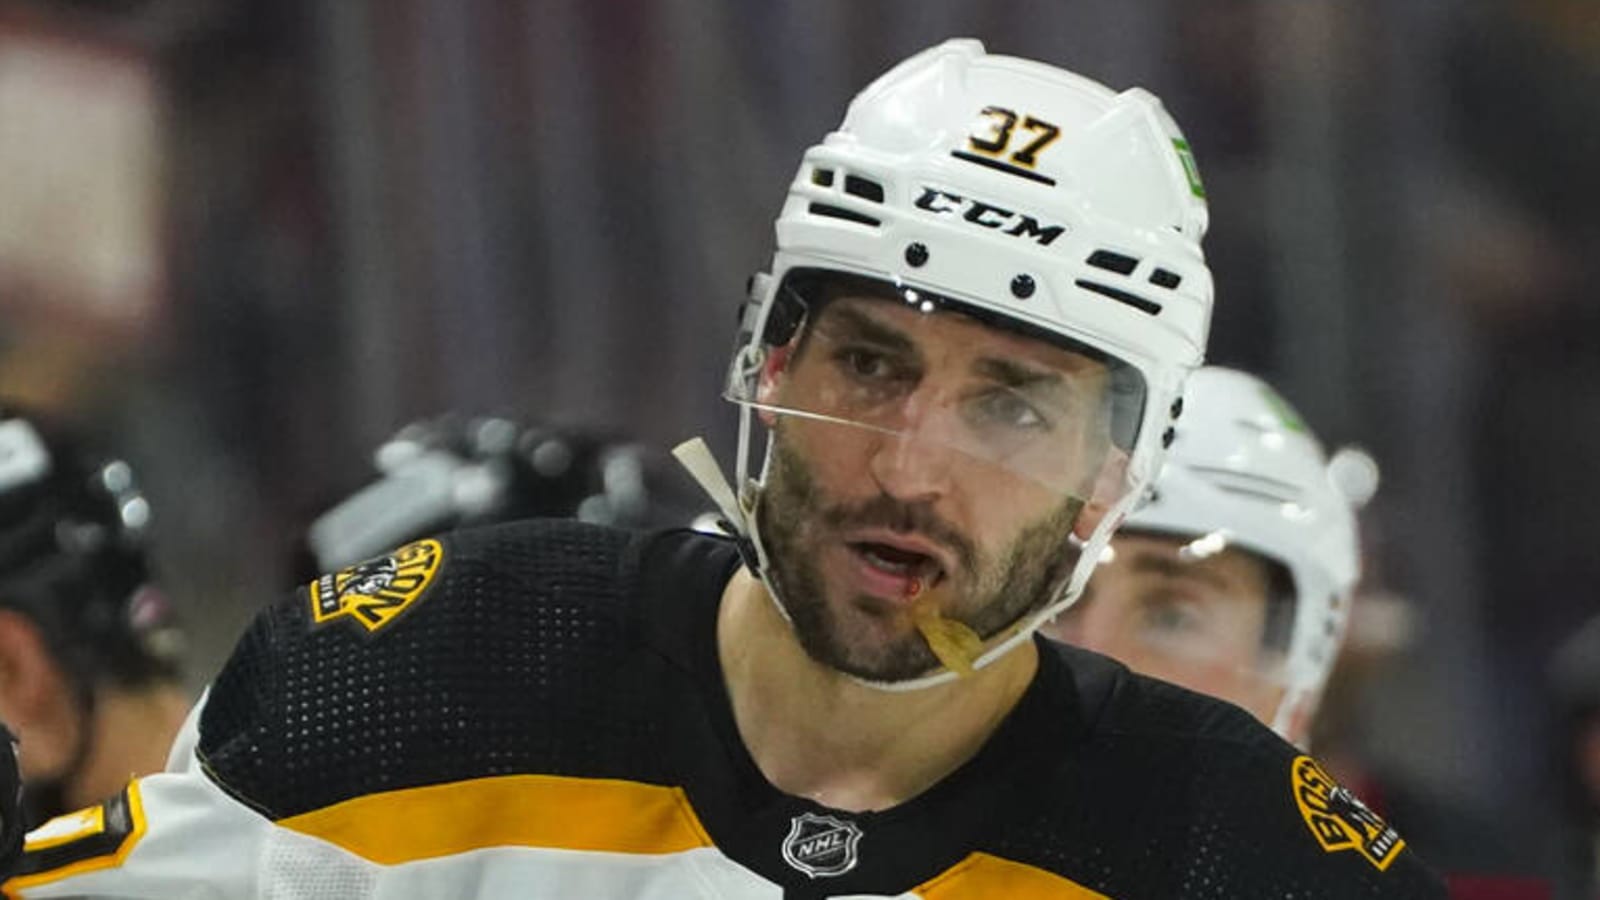 Report: Patrice Bergeron to re-sign with Bruins on likely one-year deal